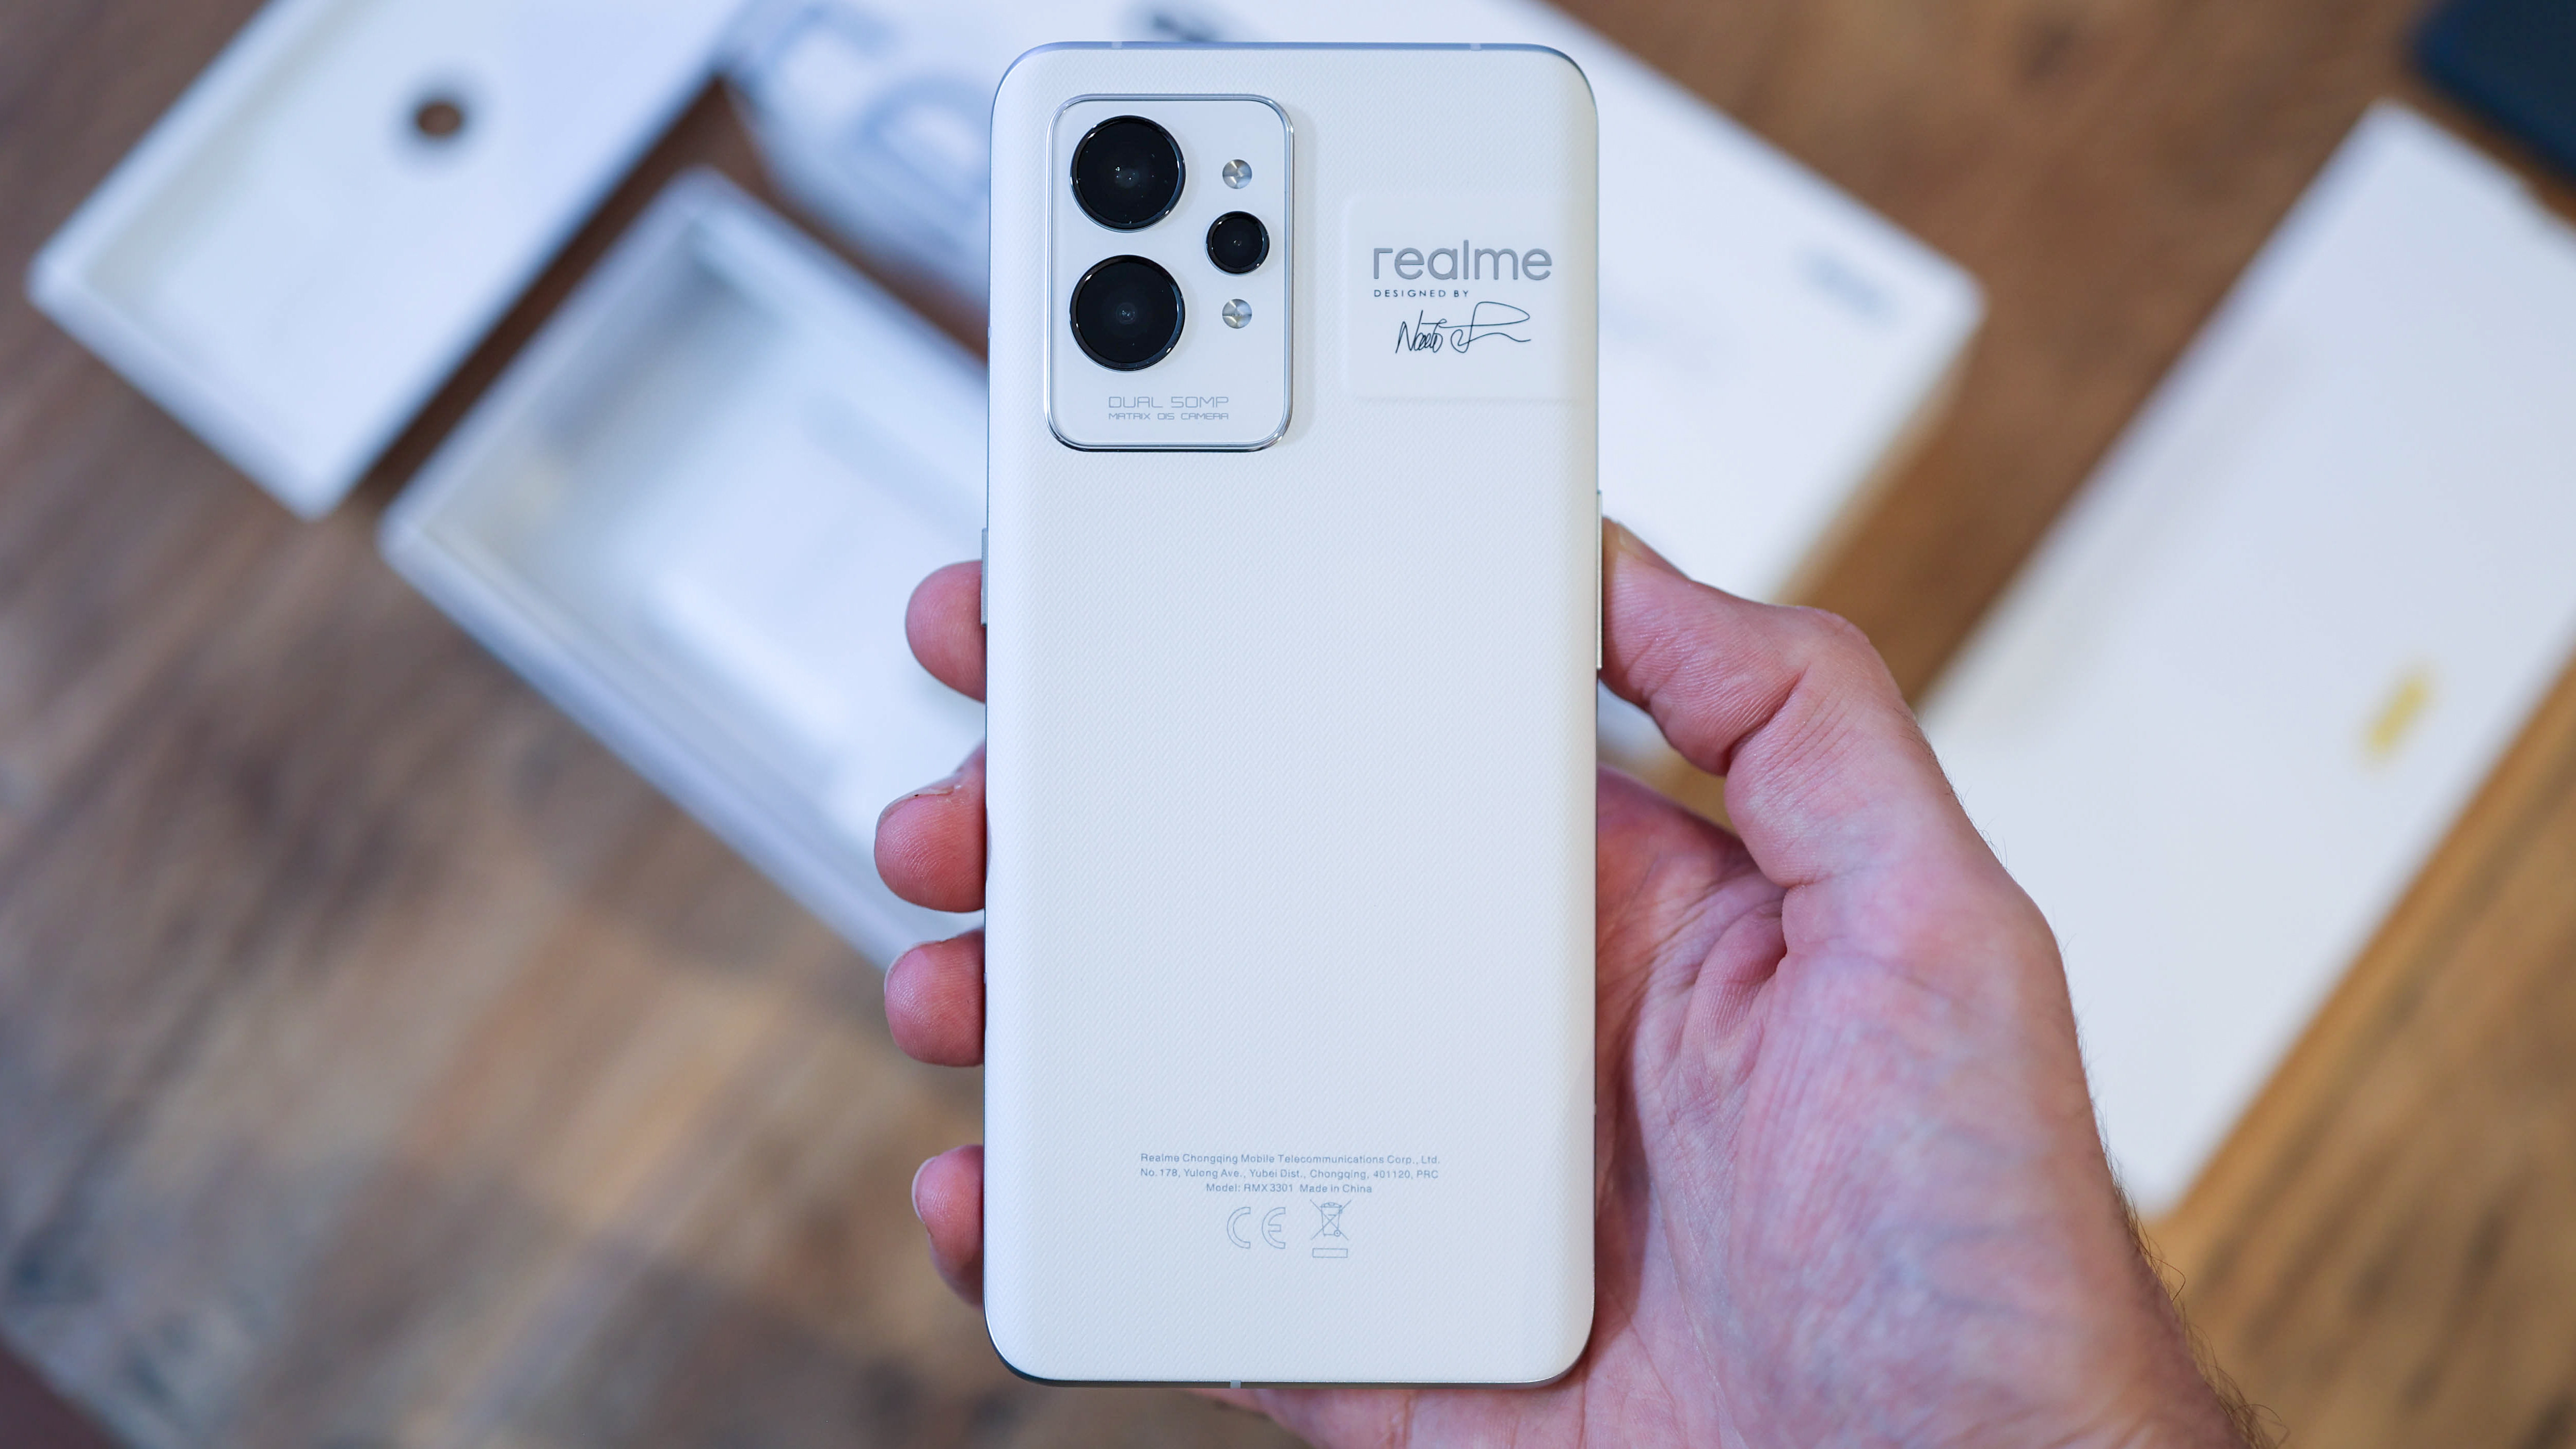 Best phone for video recording: Realme GT 2 Pro